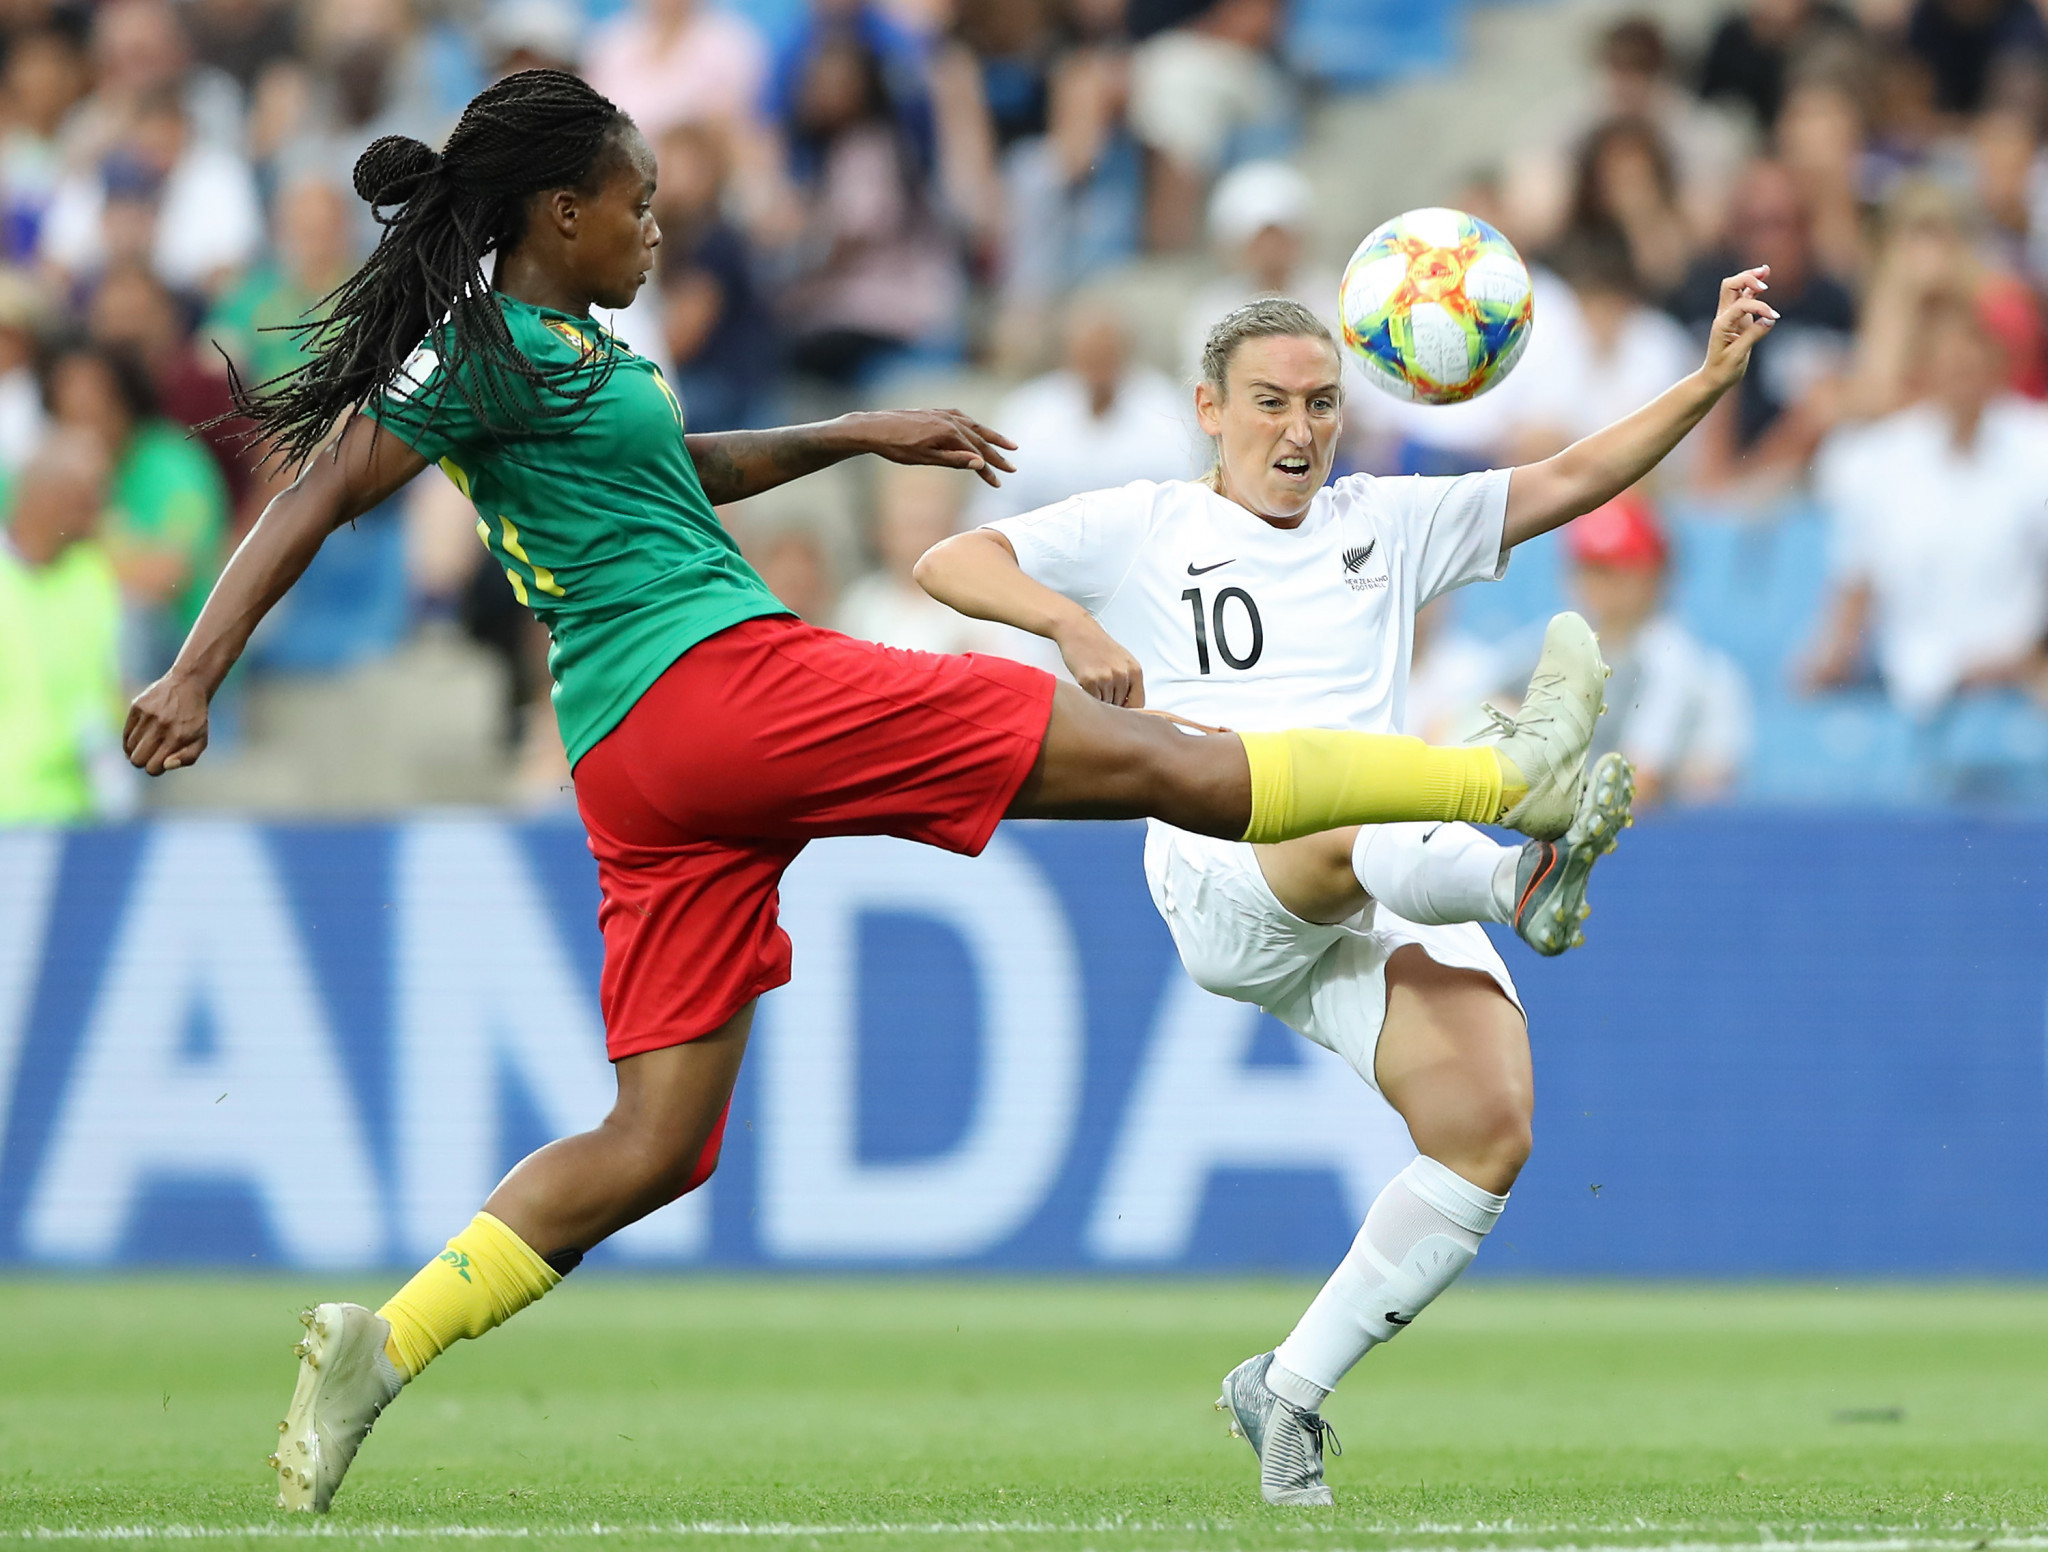 Cameroon edged past New Zealand to reach the last 16 of the FIFA Women's World Cup ©Getty Images